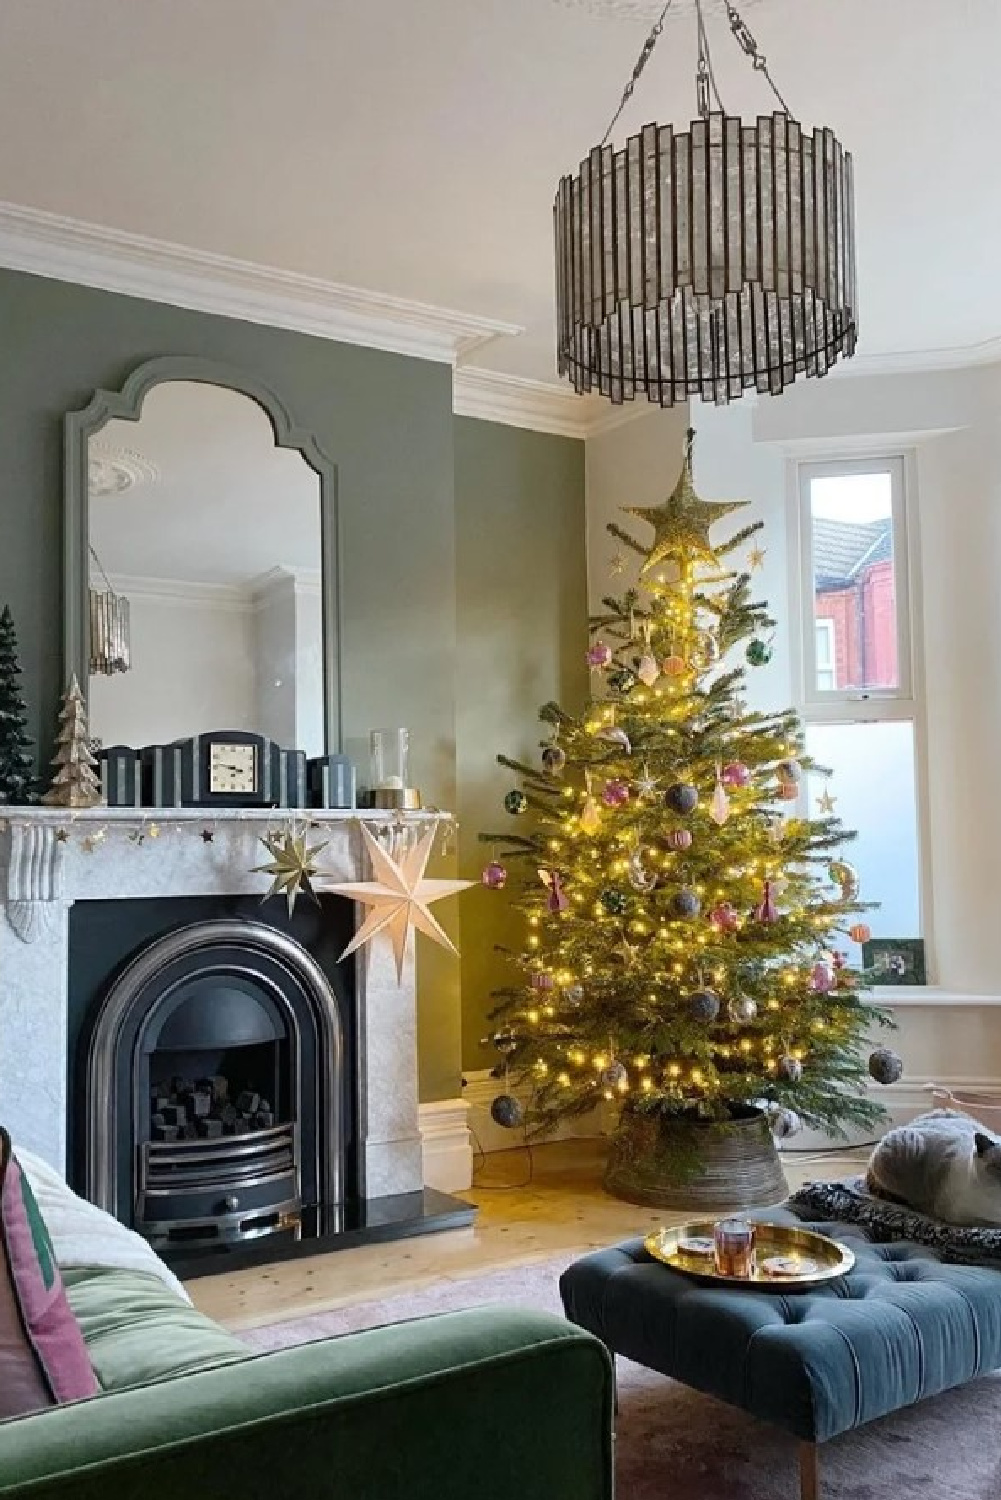 Farrow & Ball Strong White and Card Room Green in an English country living room with Christmas tree - @prettylittleterrace. #strongwhite #cardroomgreen